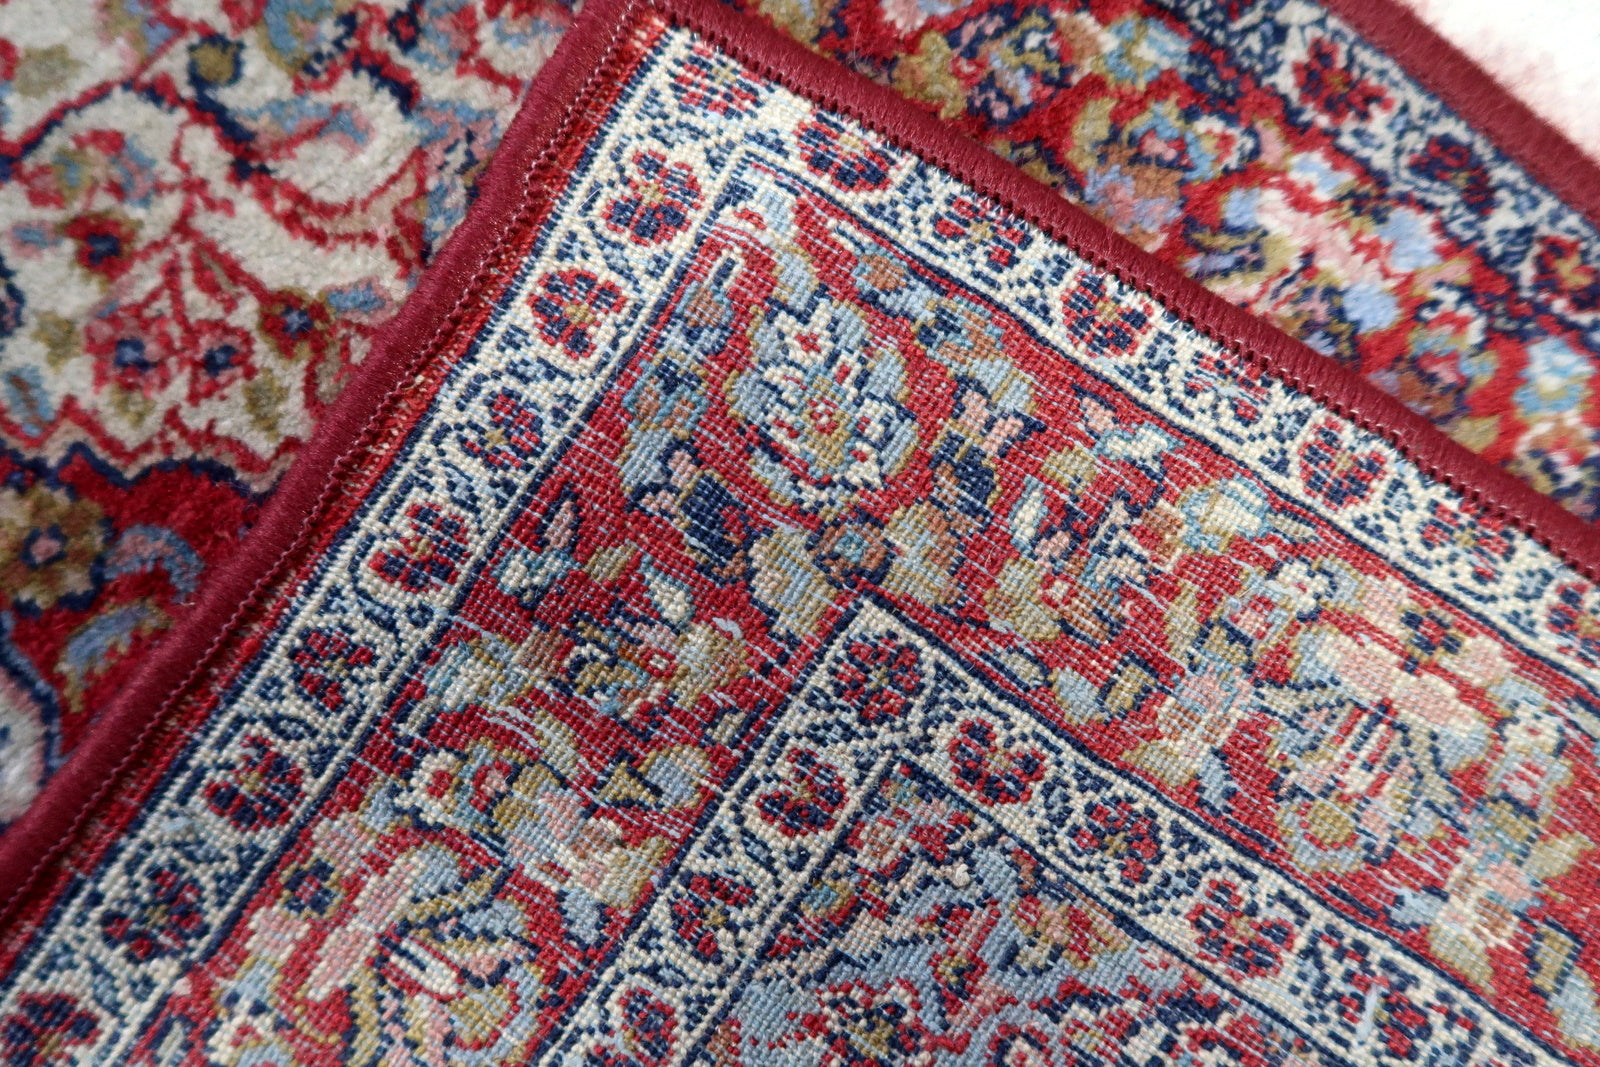 Back view of the vintage Indian rug highlighting its craftsmanship and size